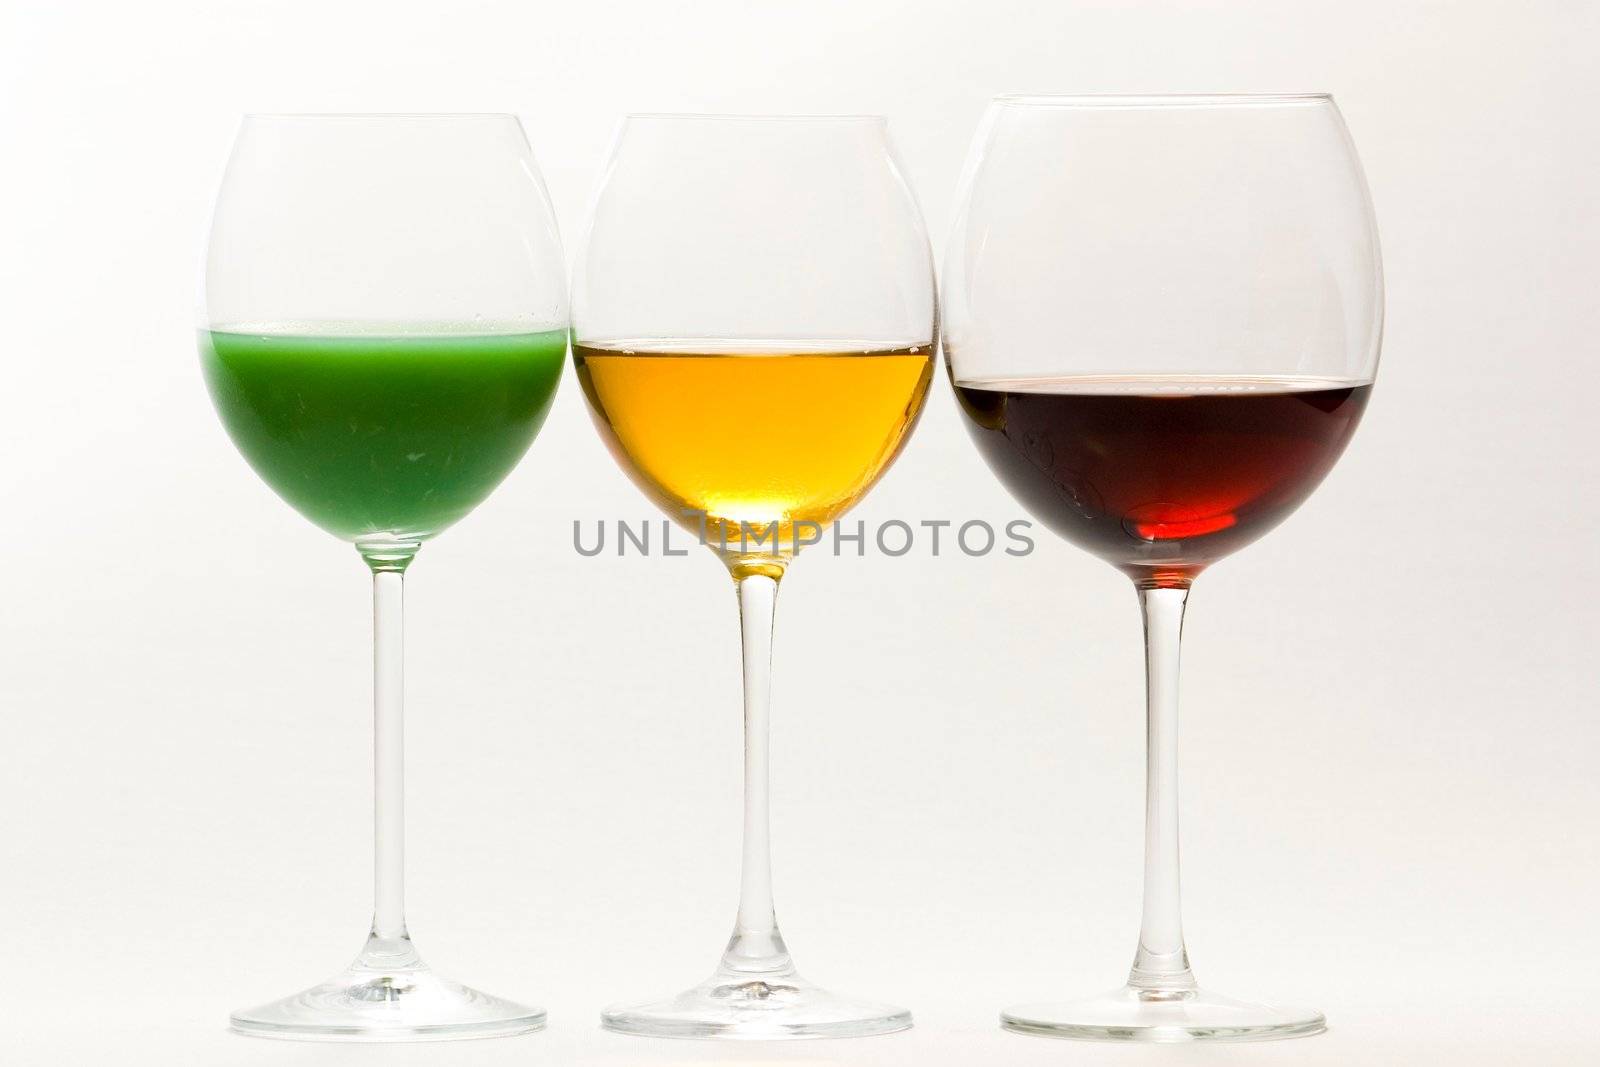 Three tall glasses on white background filled with: white, red wine and green cocktail